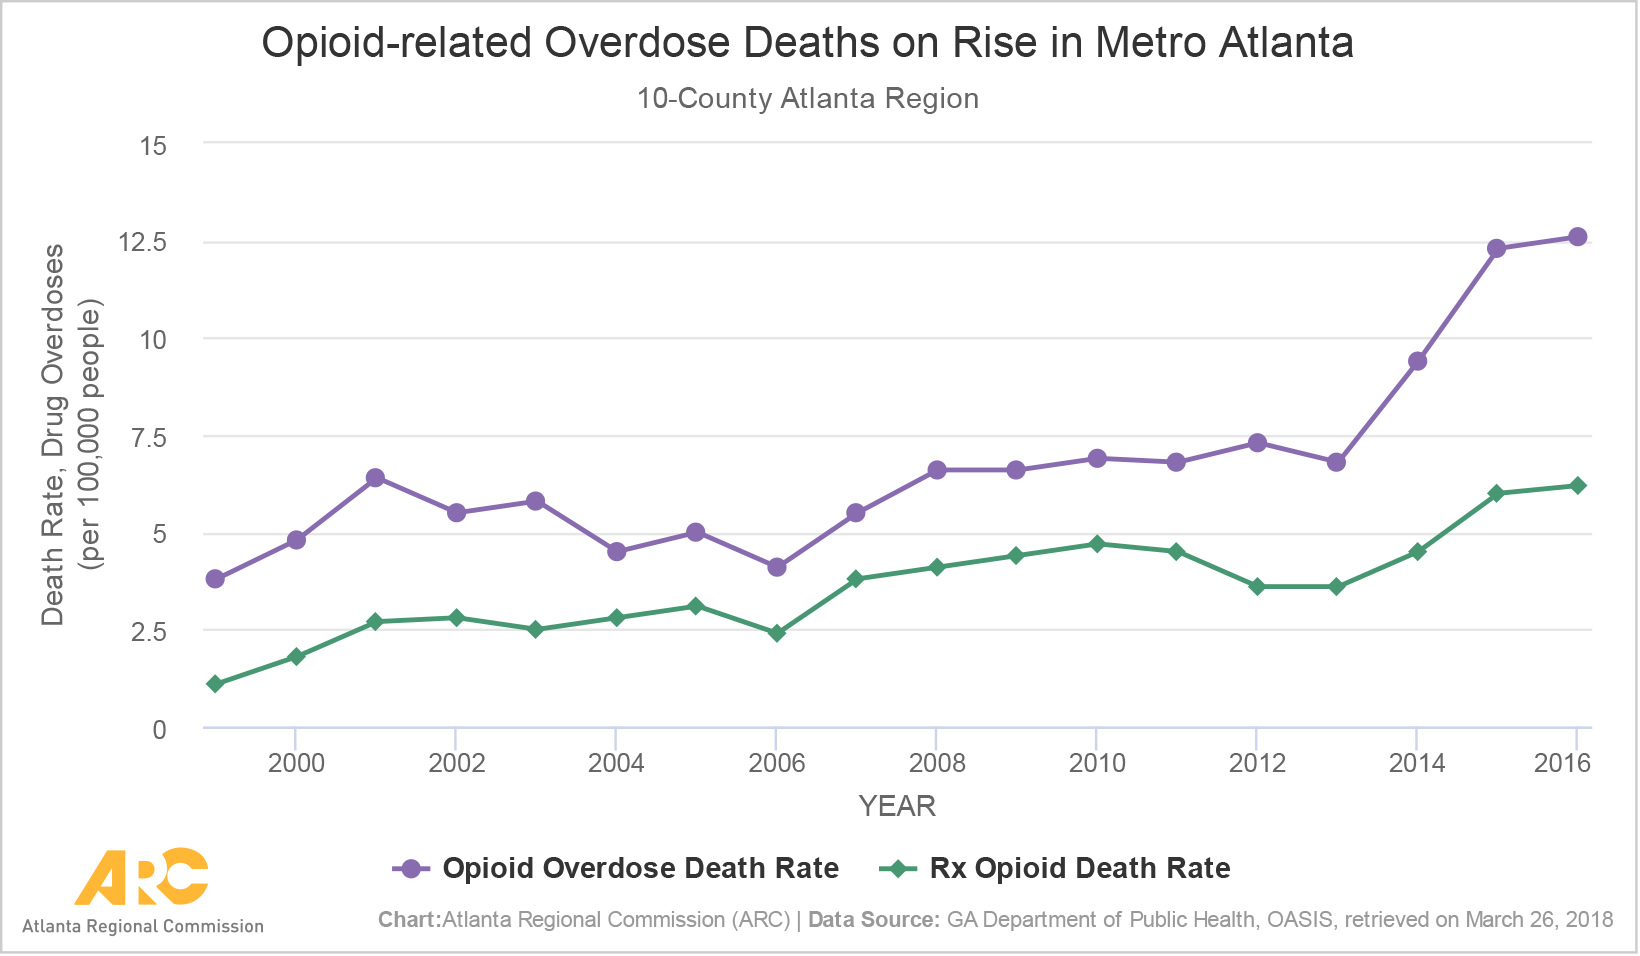 Chart - Opioid-related Overdose Deaths on Rise in Metro Atlanta